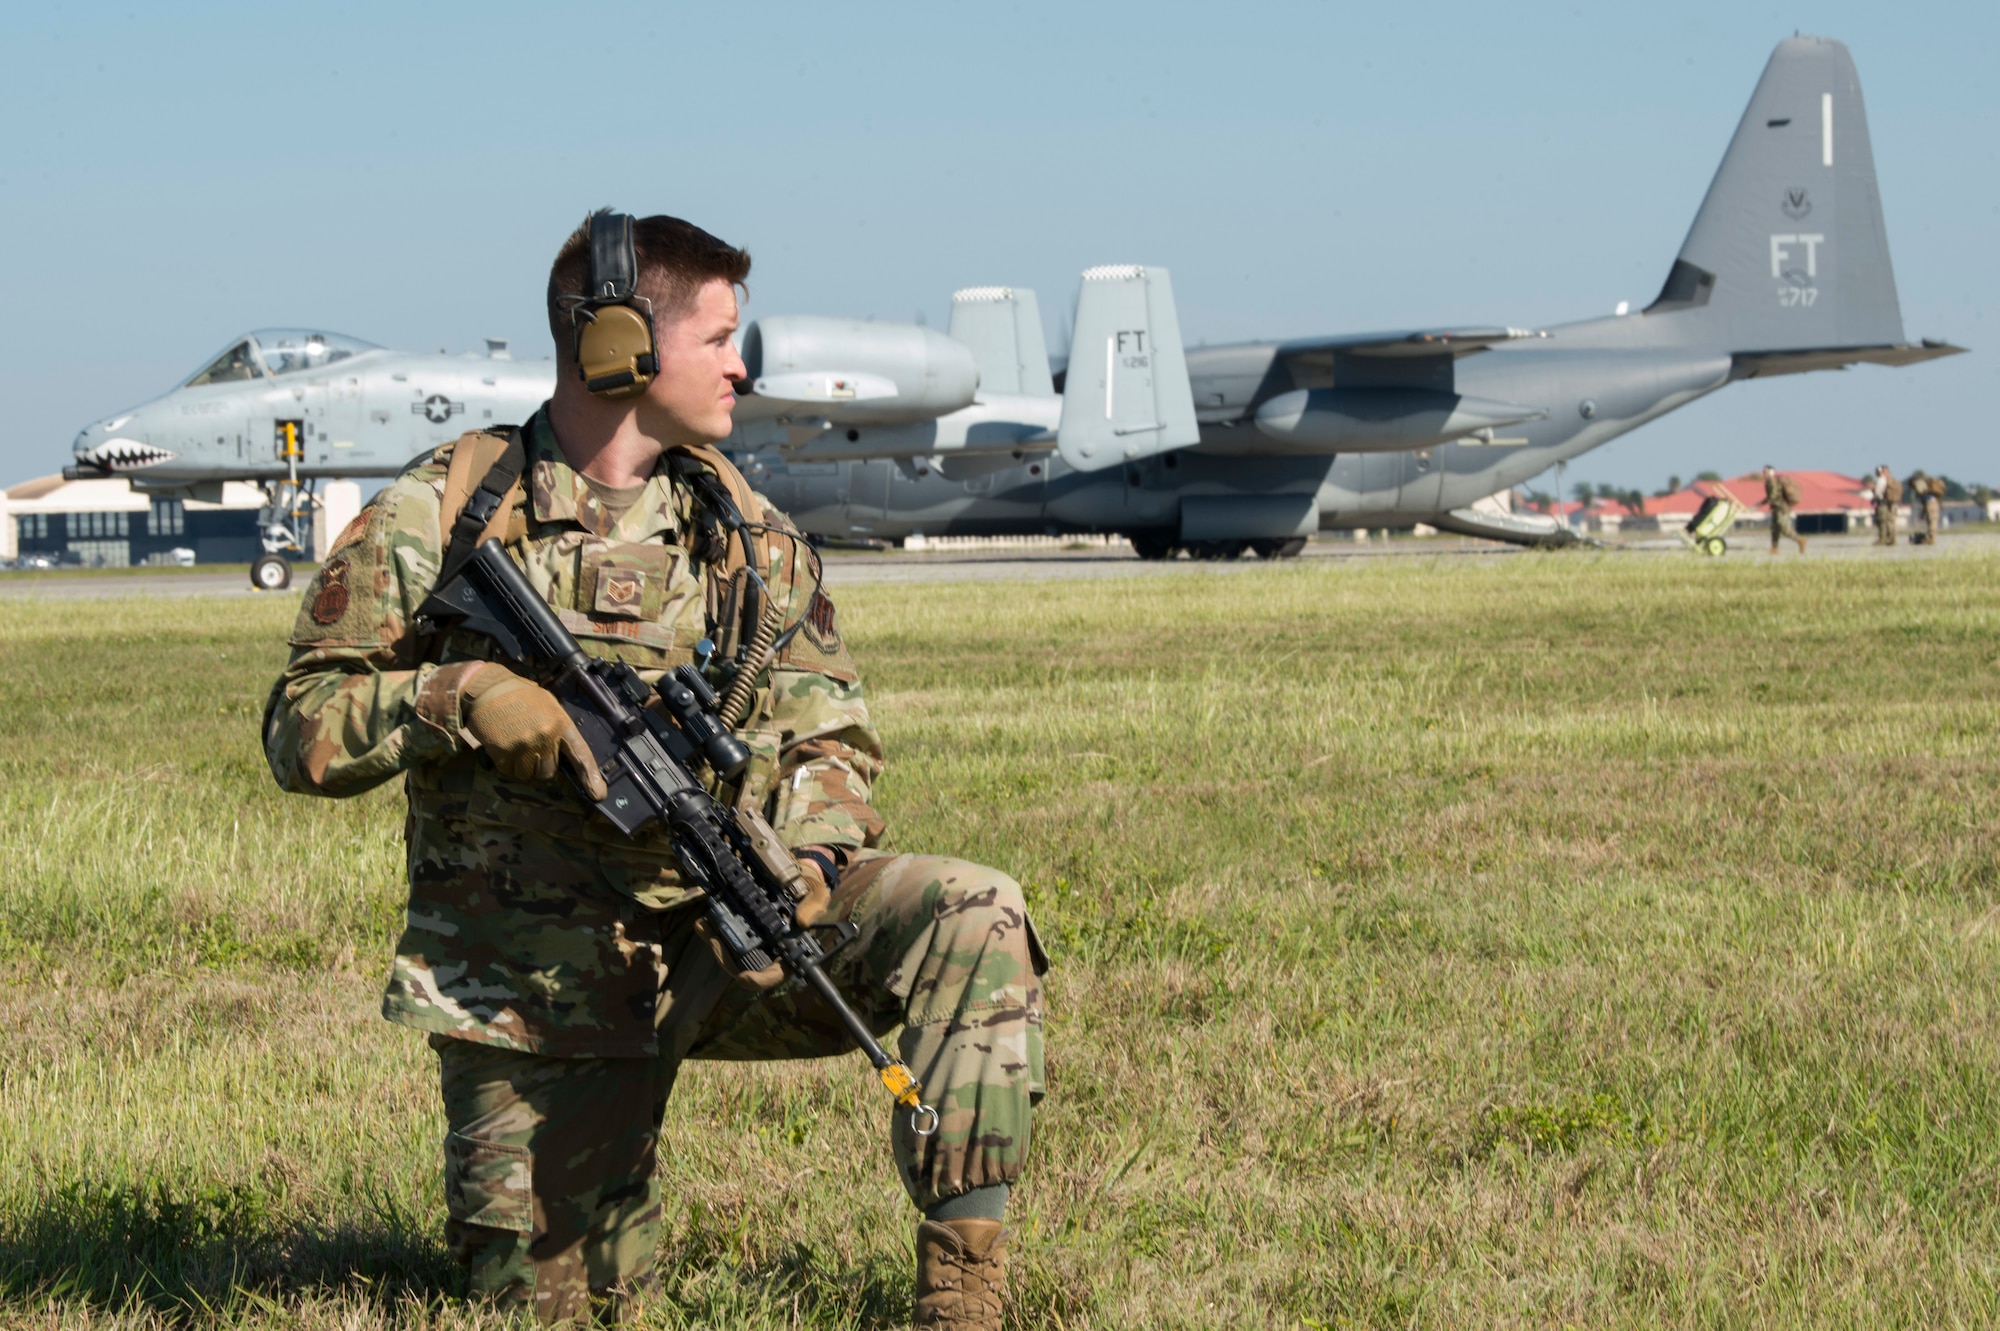 U.S. Air Force Staff Sgt. Ricky Smith, a 23rd Security Forces Squadron physical security NCO, guards a 74th Fighter Squadron A-10 Thunderbolt II and a 71st Rescue Squadron HC130J Combat King II on MacDill Air Force Base, Fla. for exercise Mobil Tiger, Nov. 19, 2019.